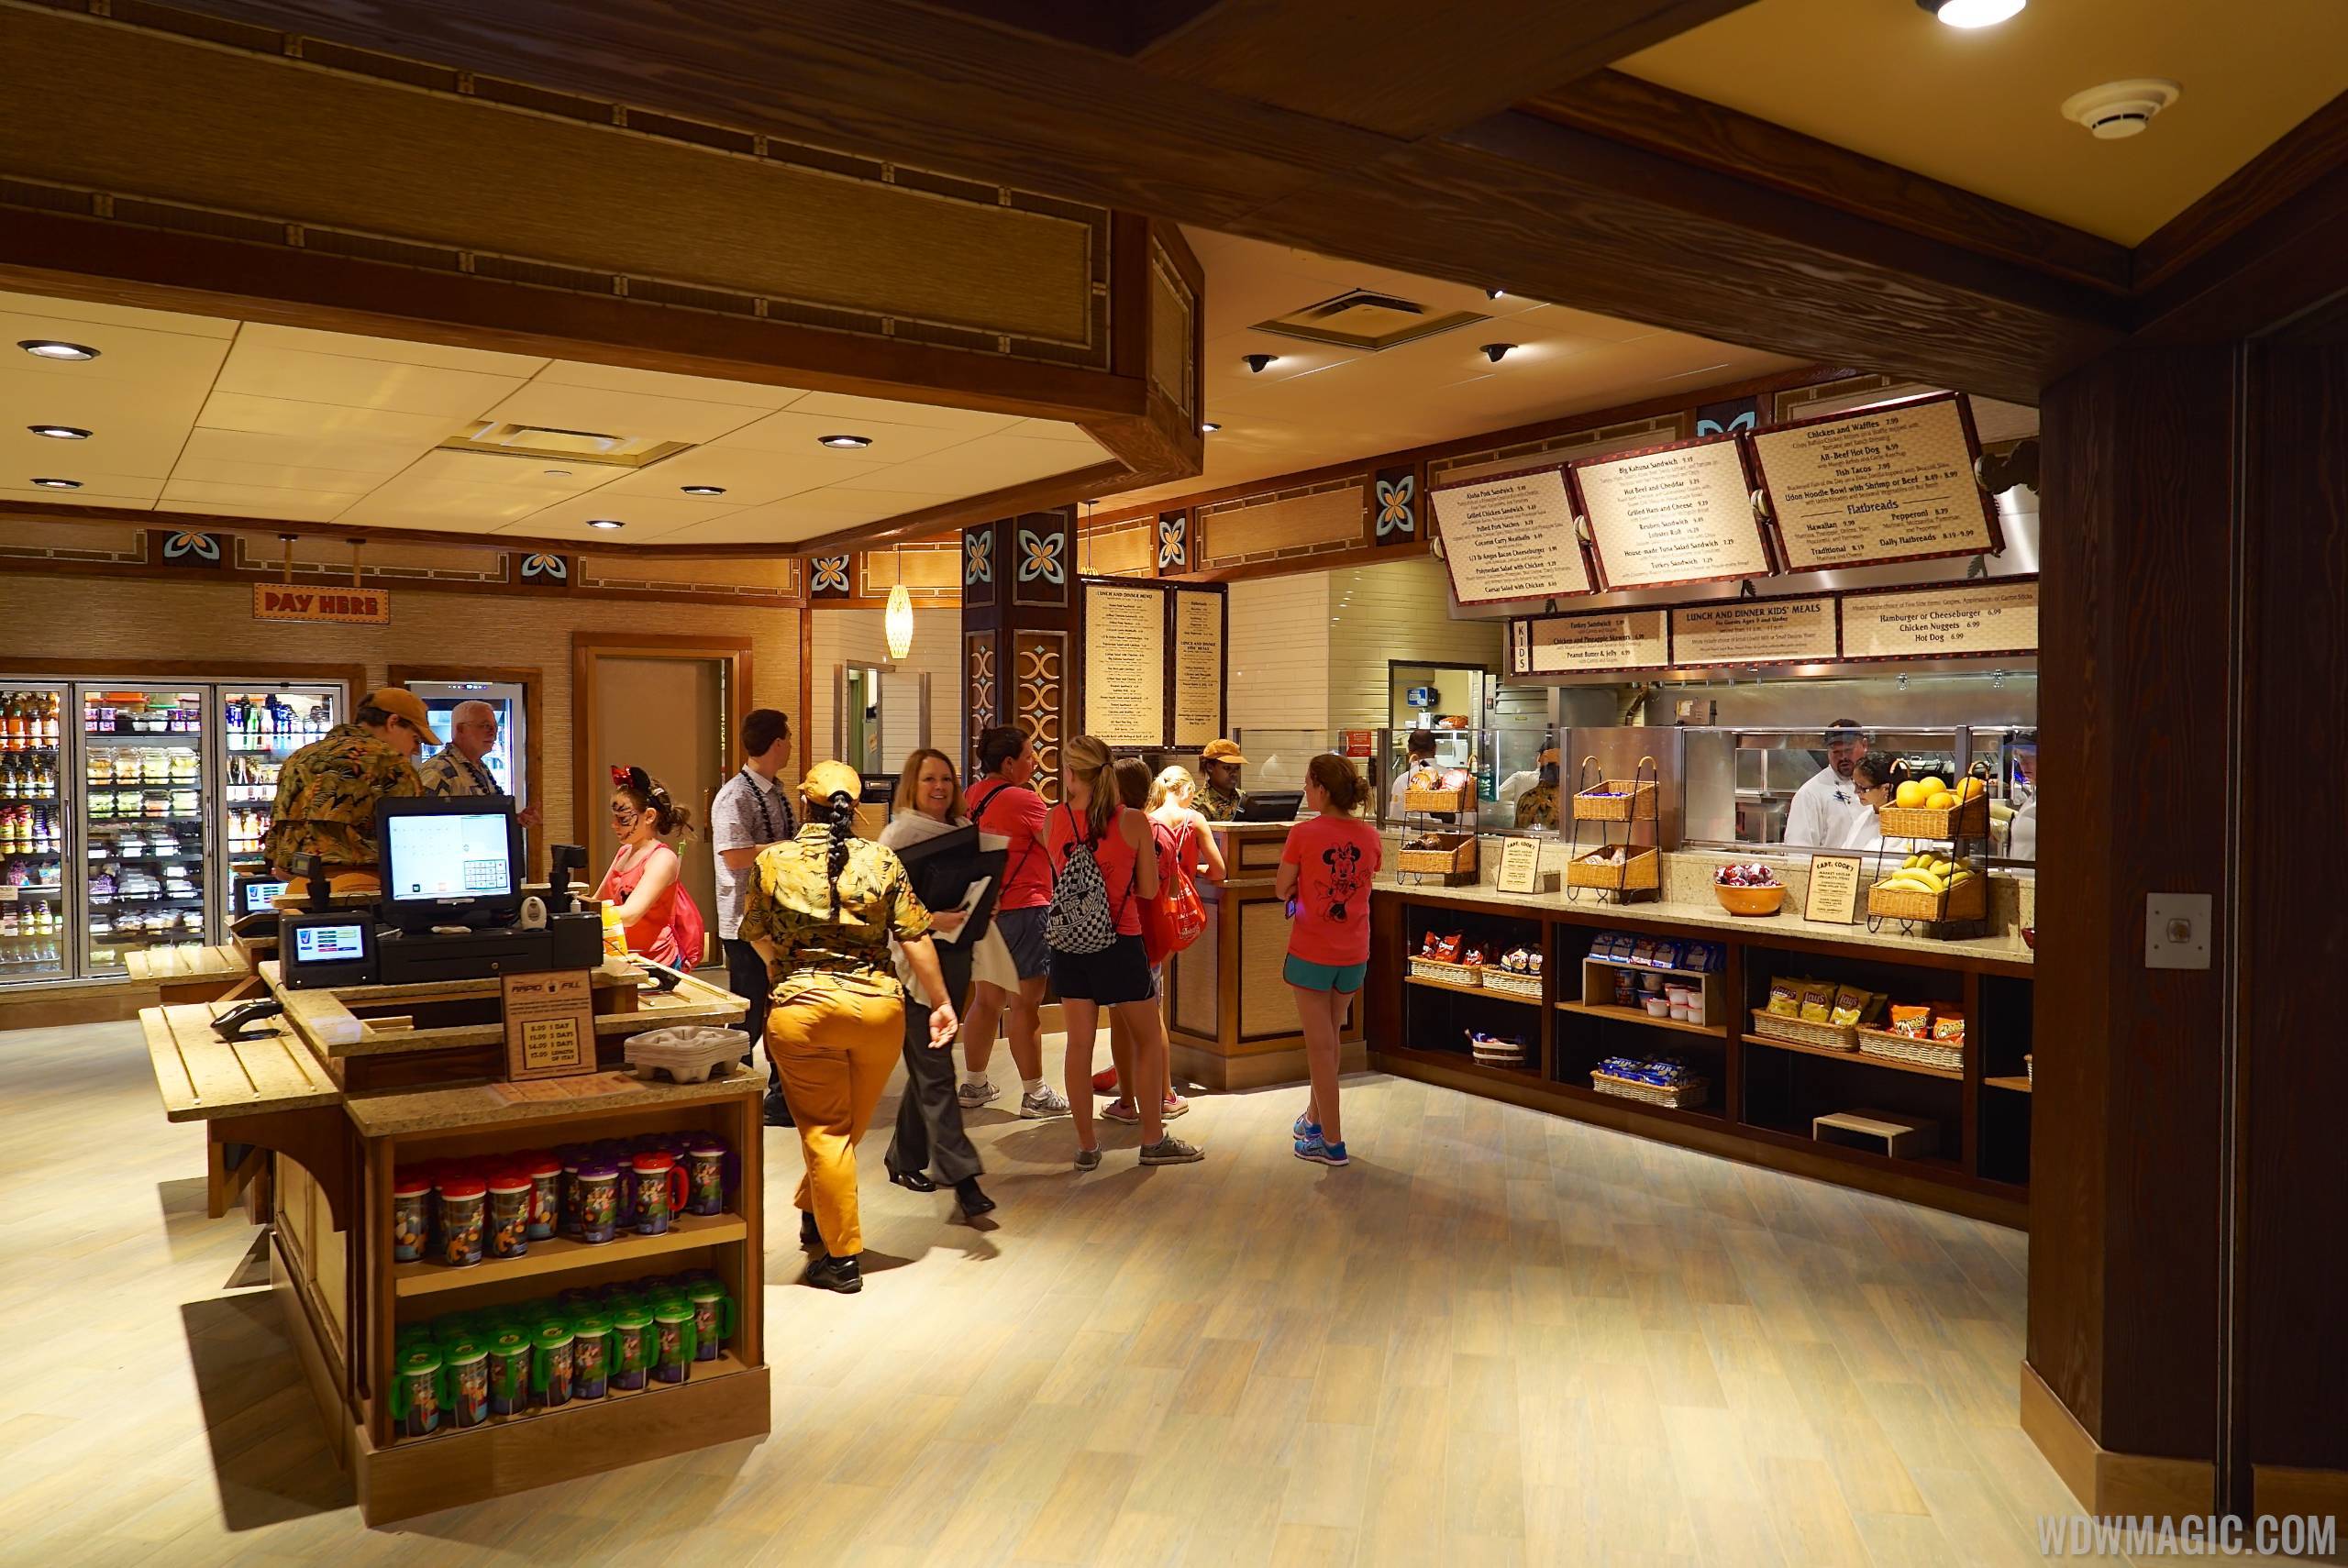 Captain Cook's reopens after refurbishment